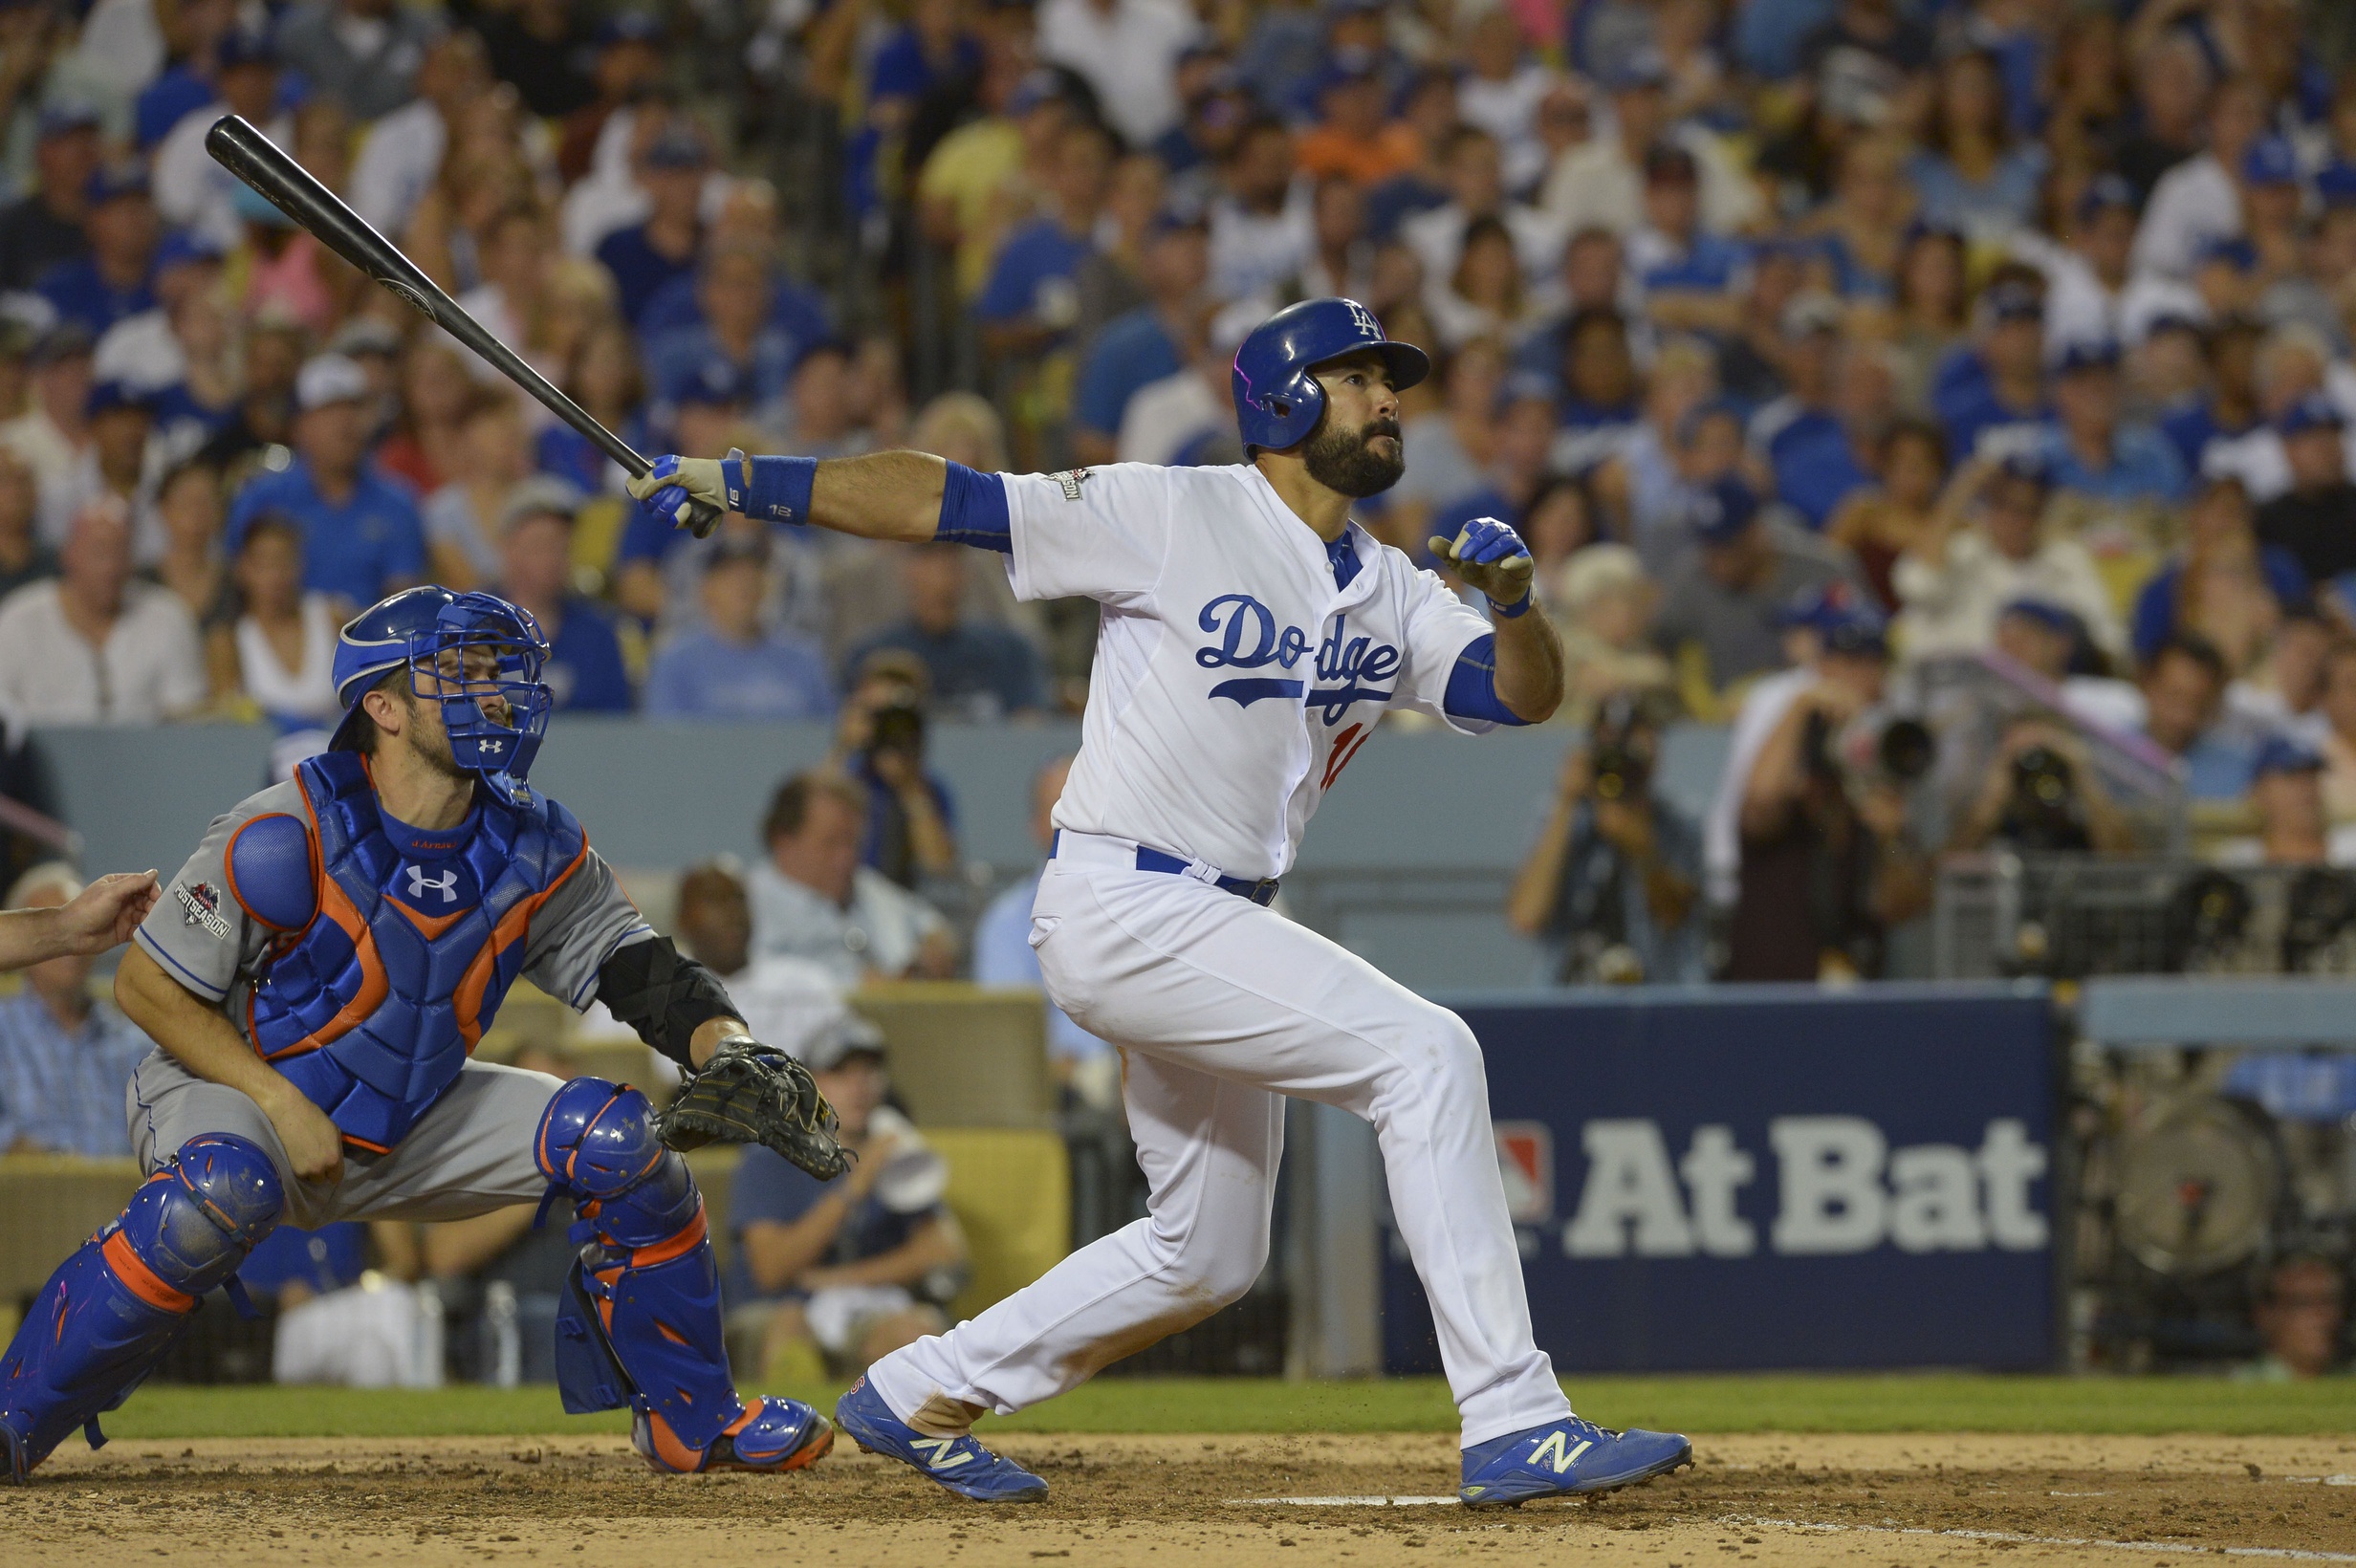 Andre Ethier had given up on returning to Dodgers roster this fall – Daily  News